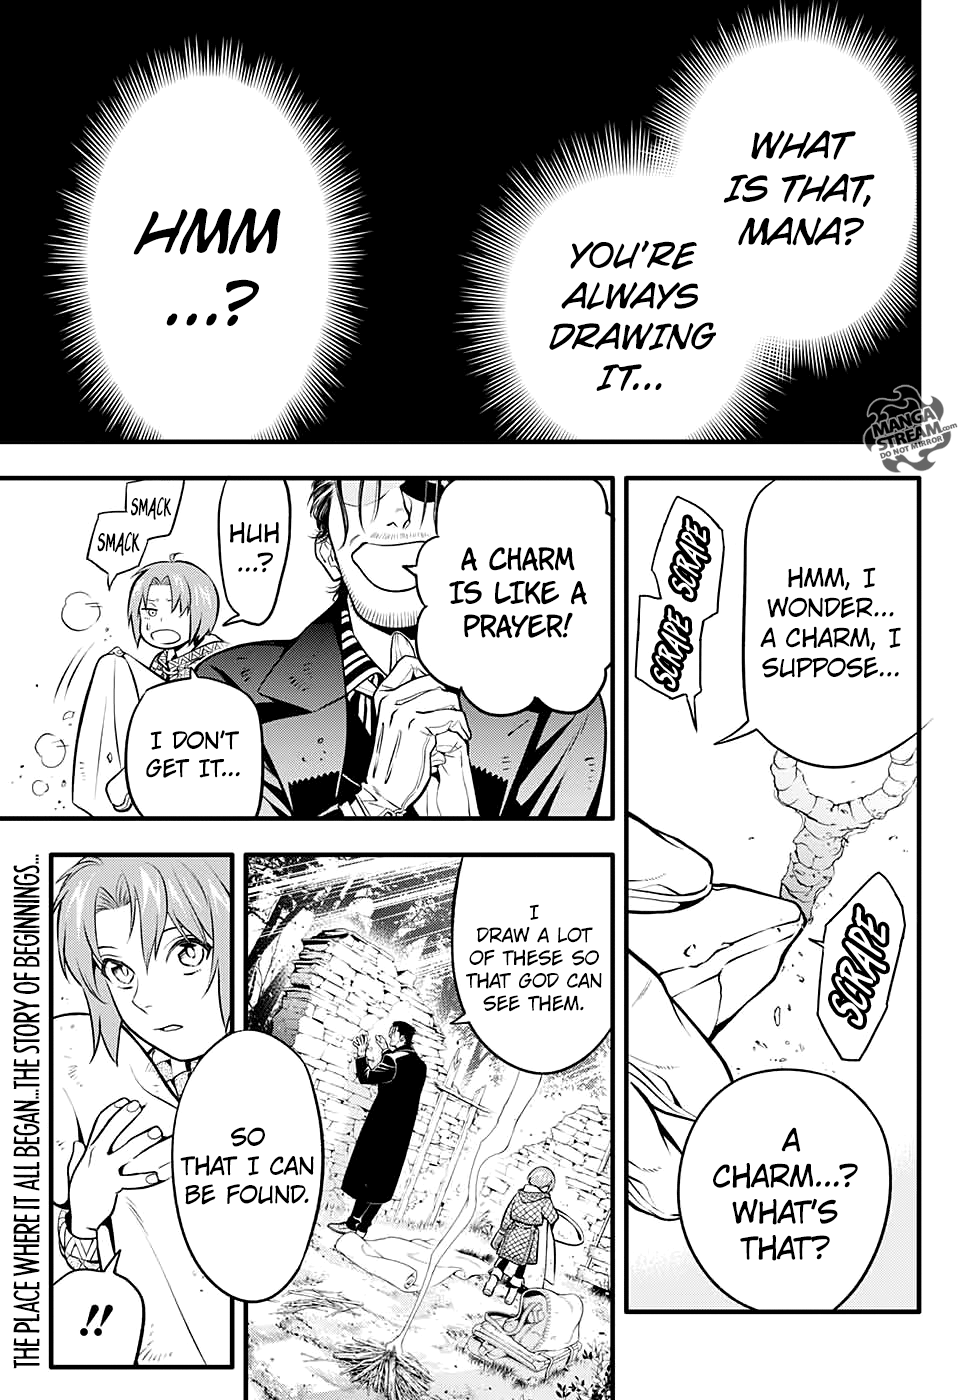 D.Gray-man chapter 231 page 3